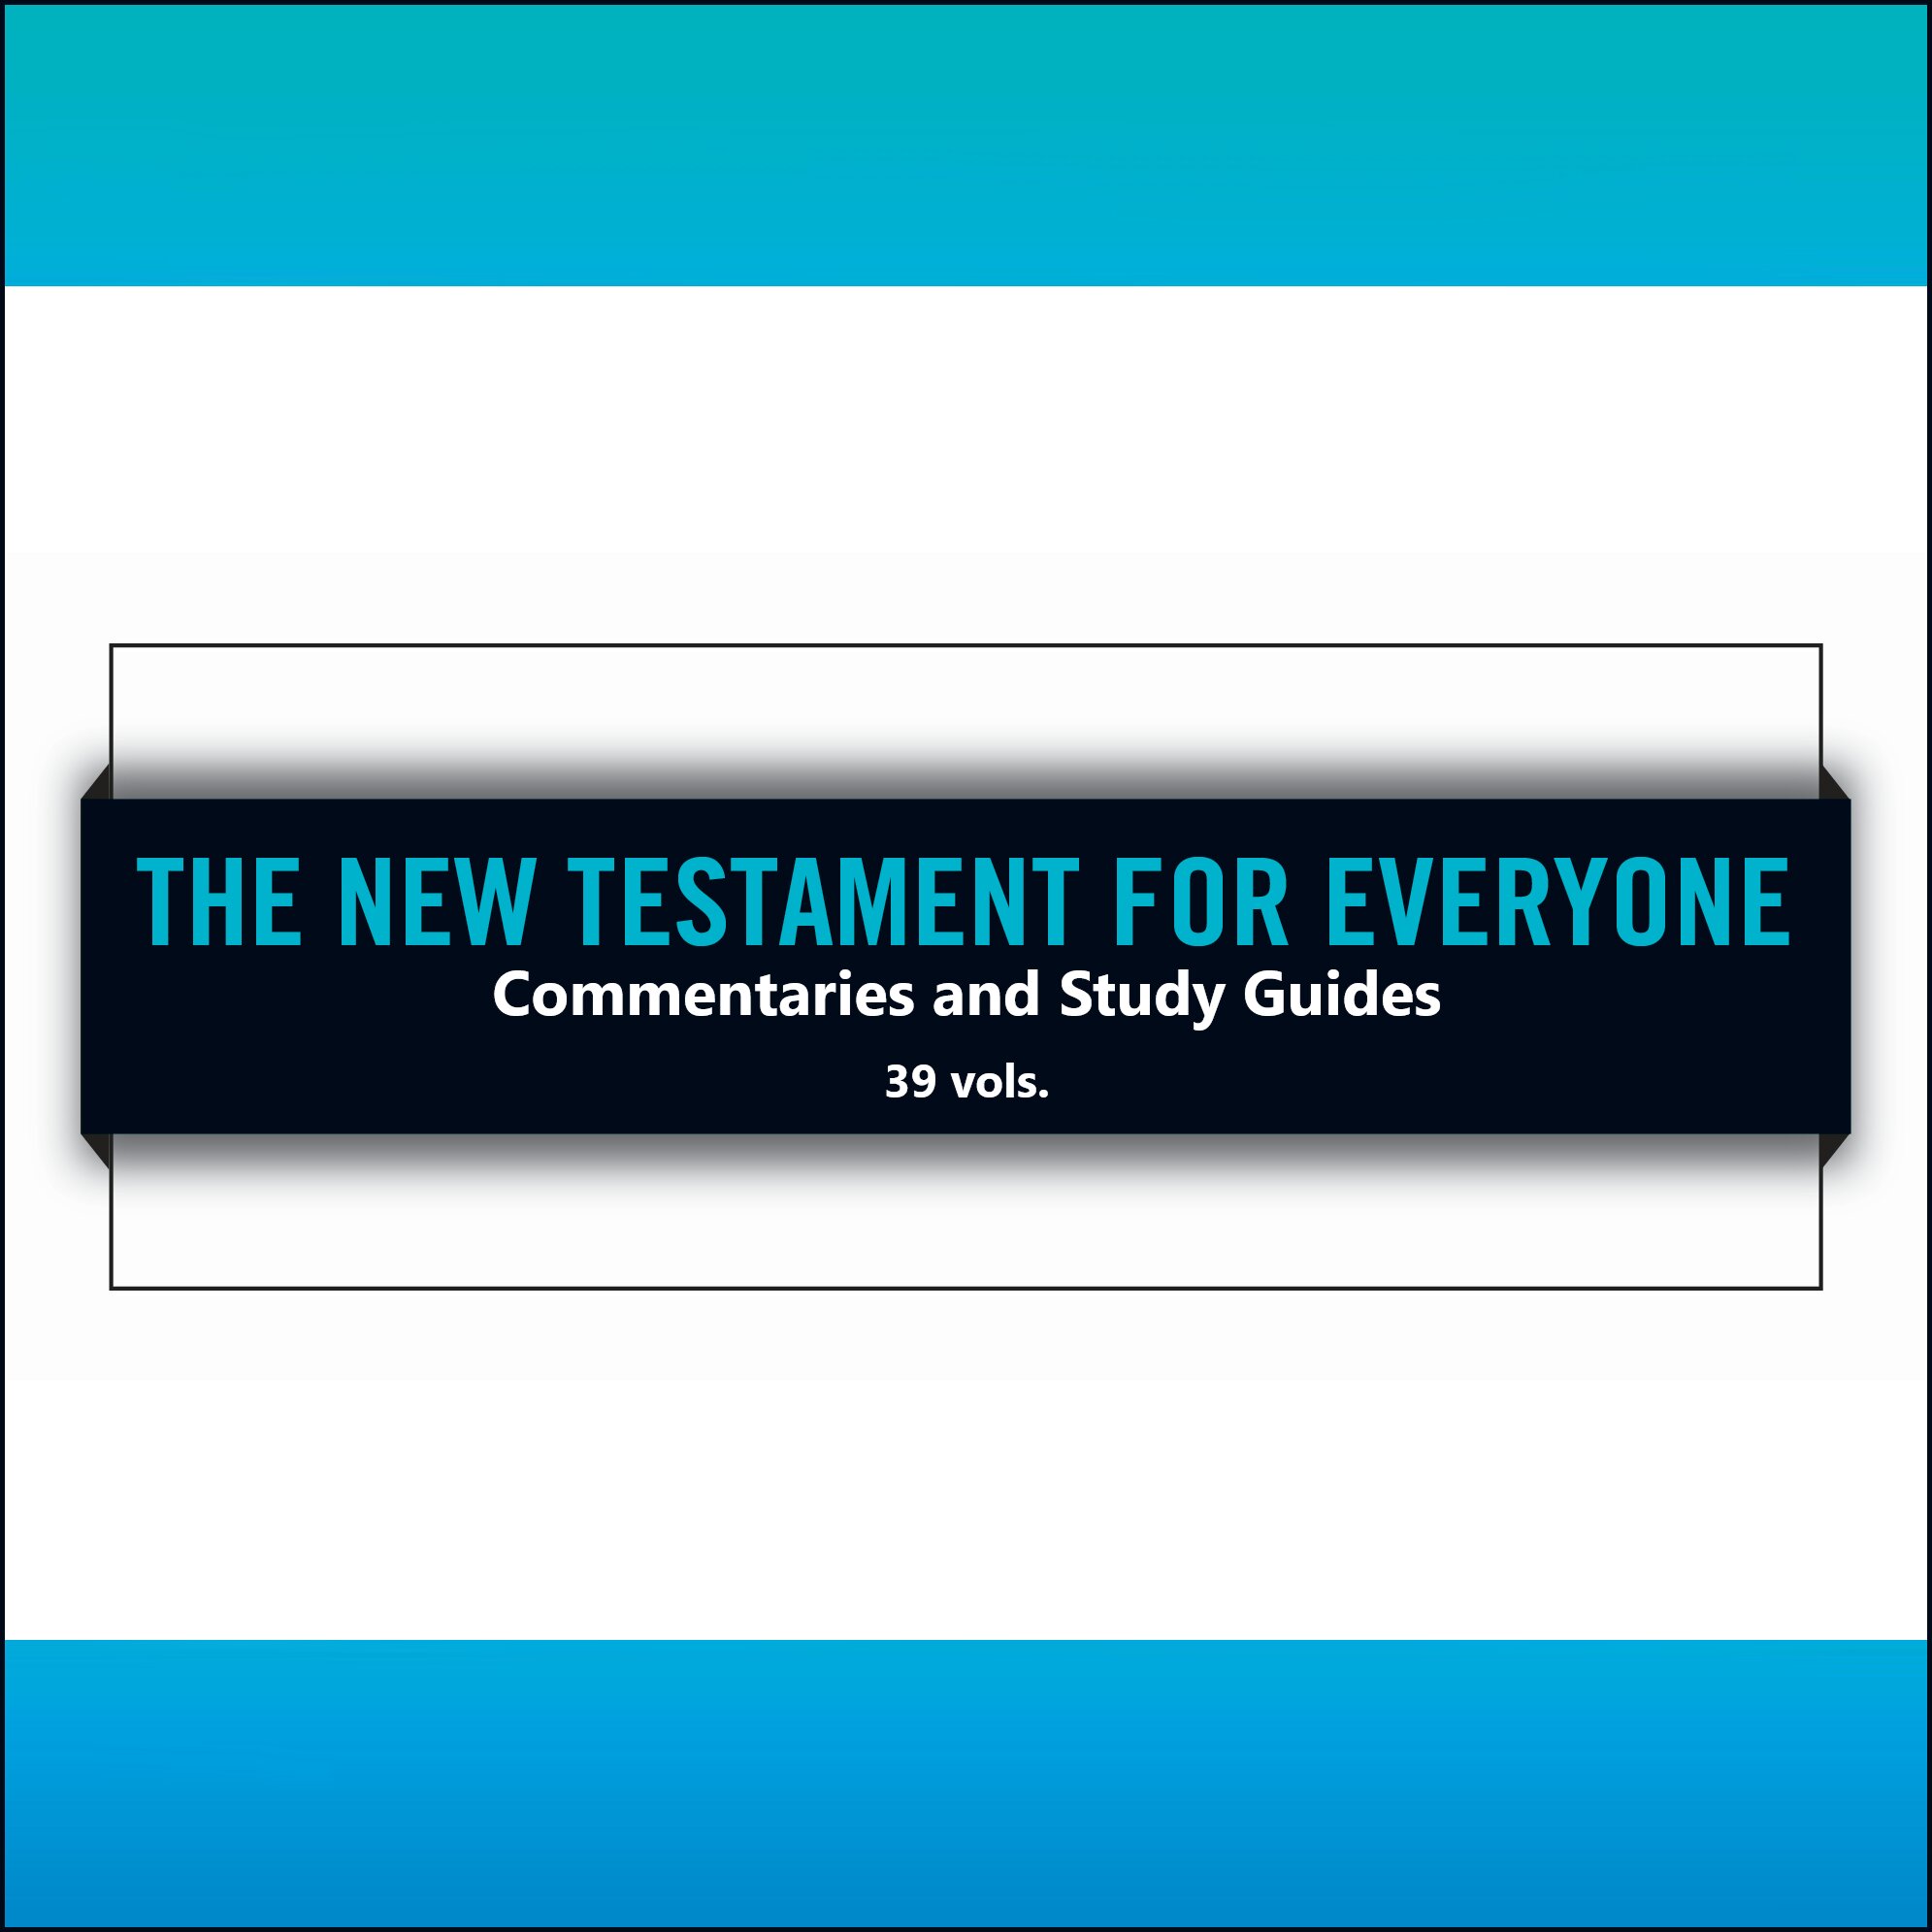 New Testament for Everyone: Commentaries and Study Guides (39 vols.)